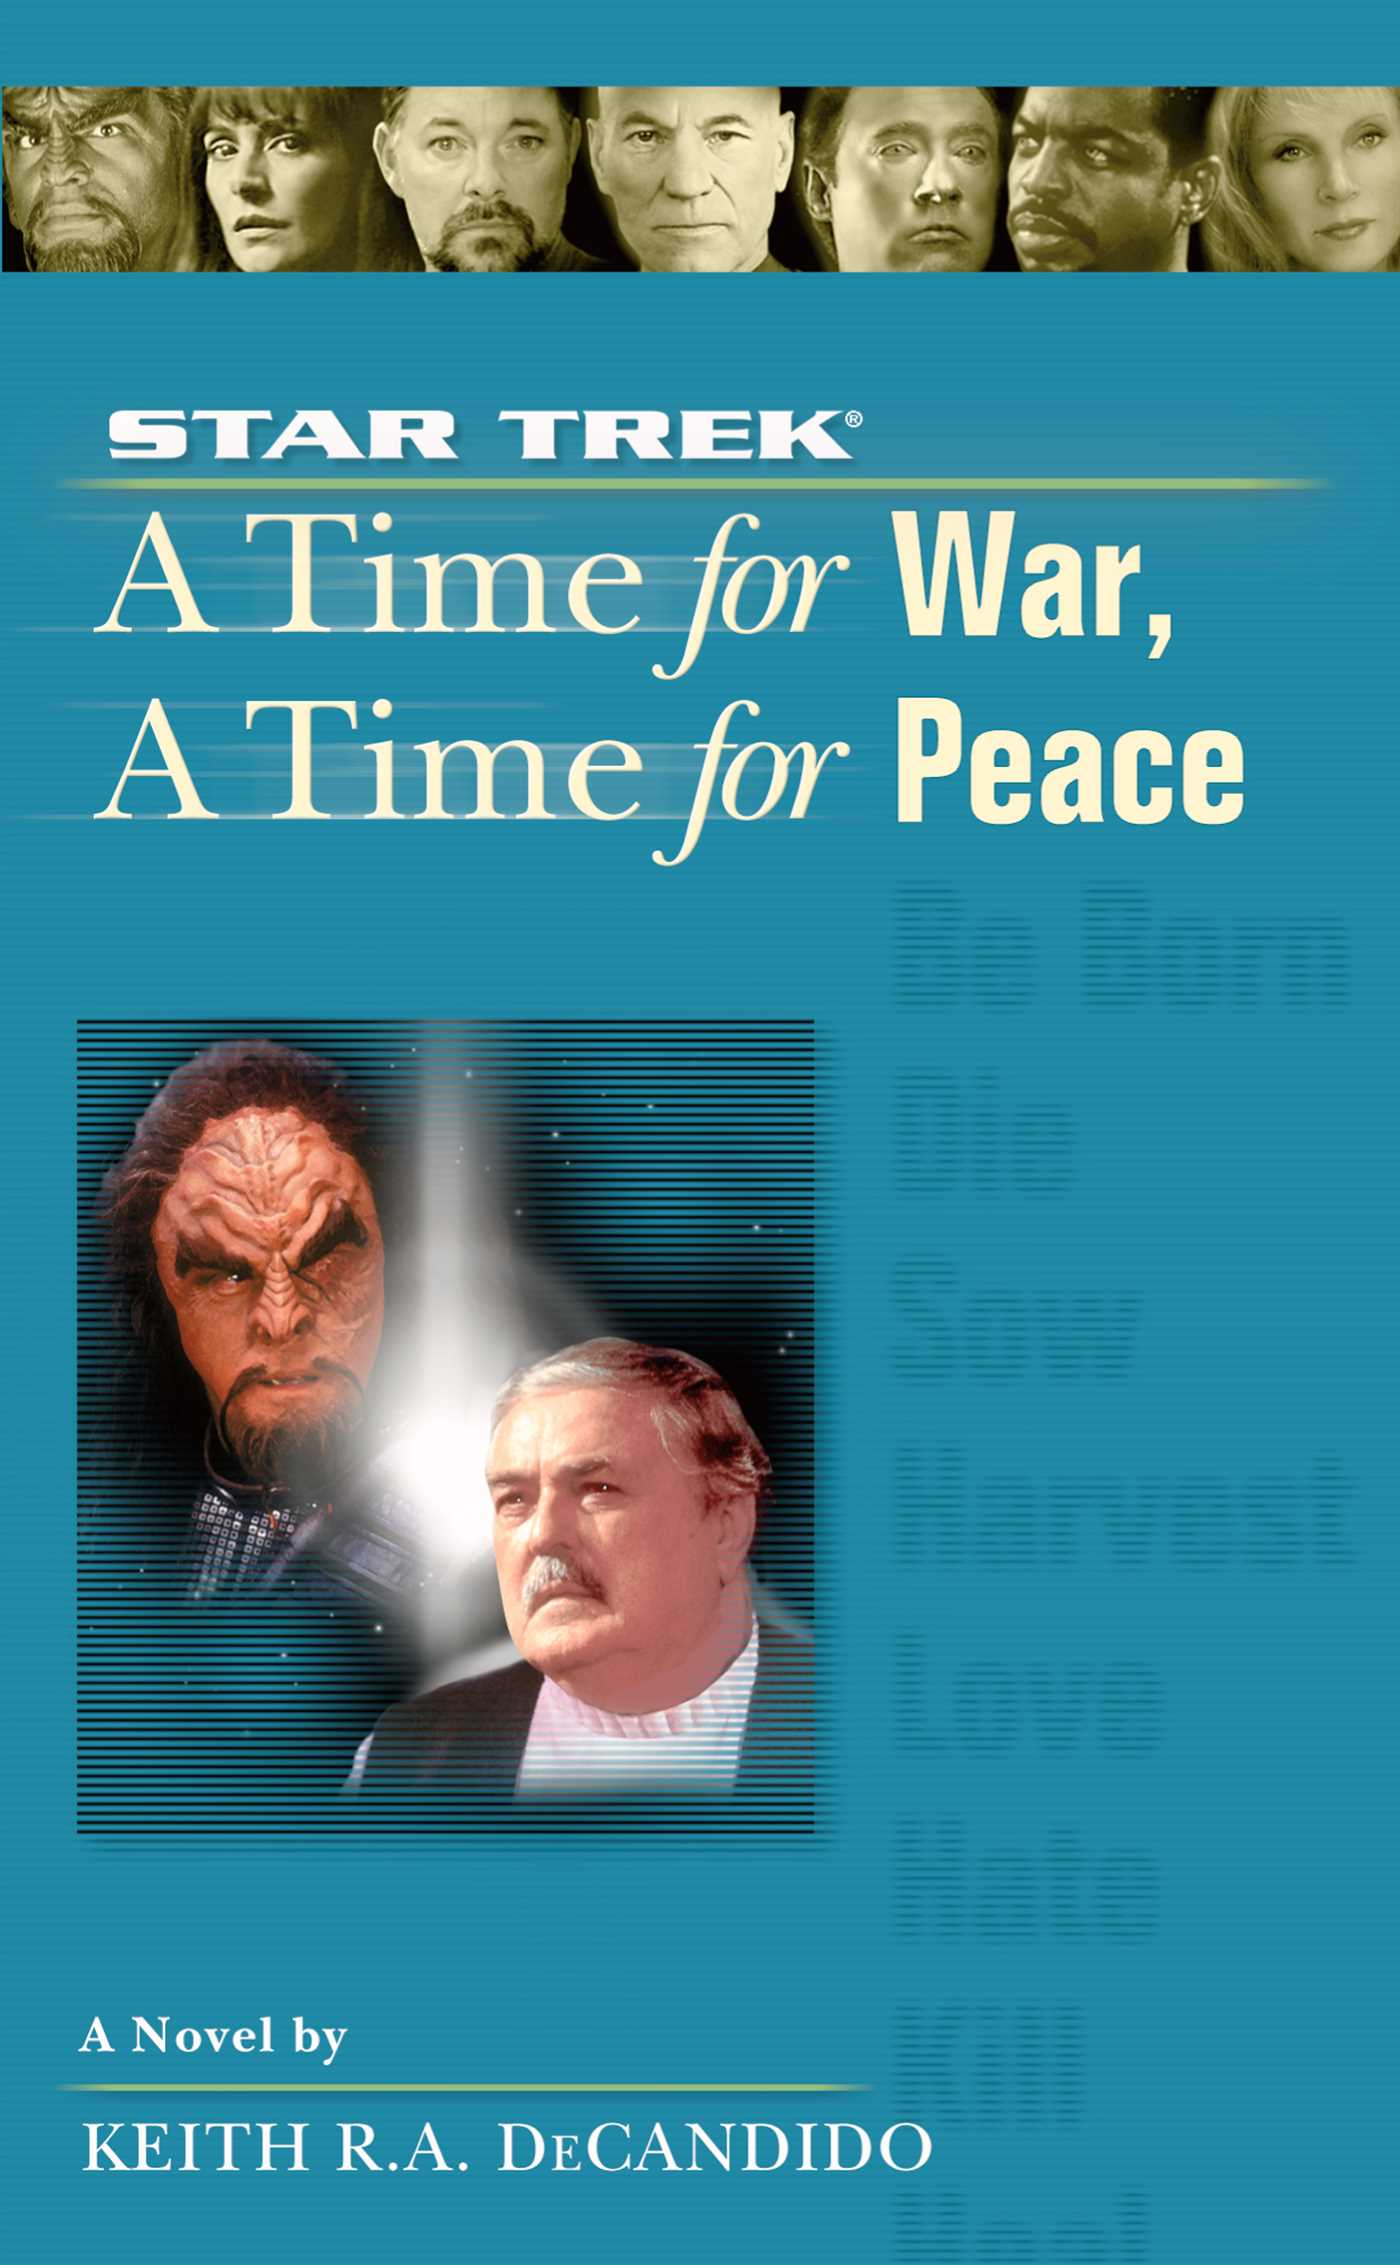 “Star Trek: The Next Generation: 9 A Time For War, A Time For Peace” Review by Motionpicturescomics.com